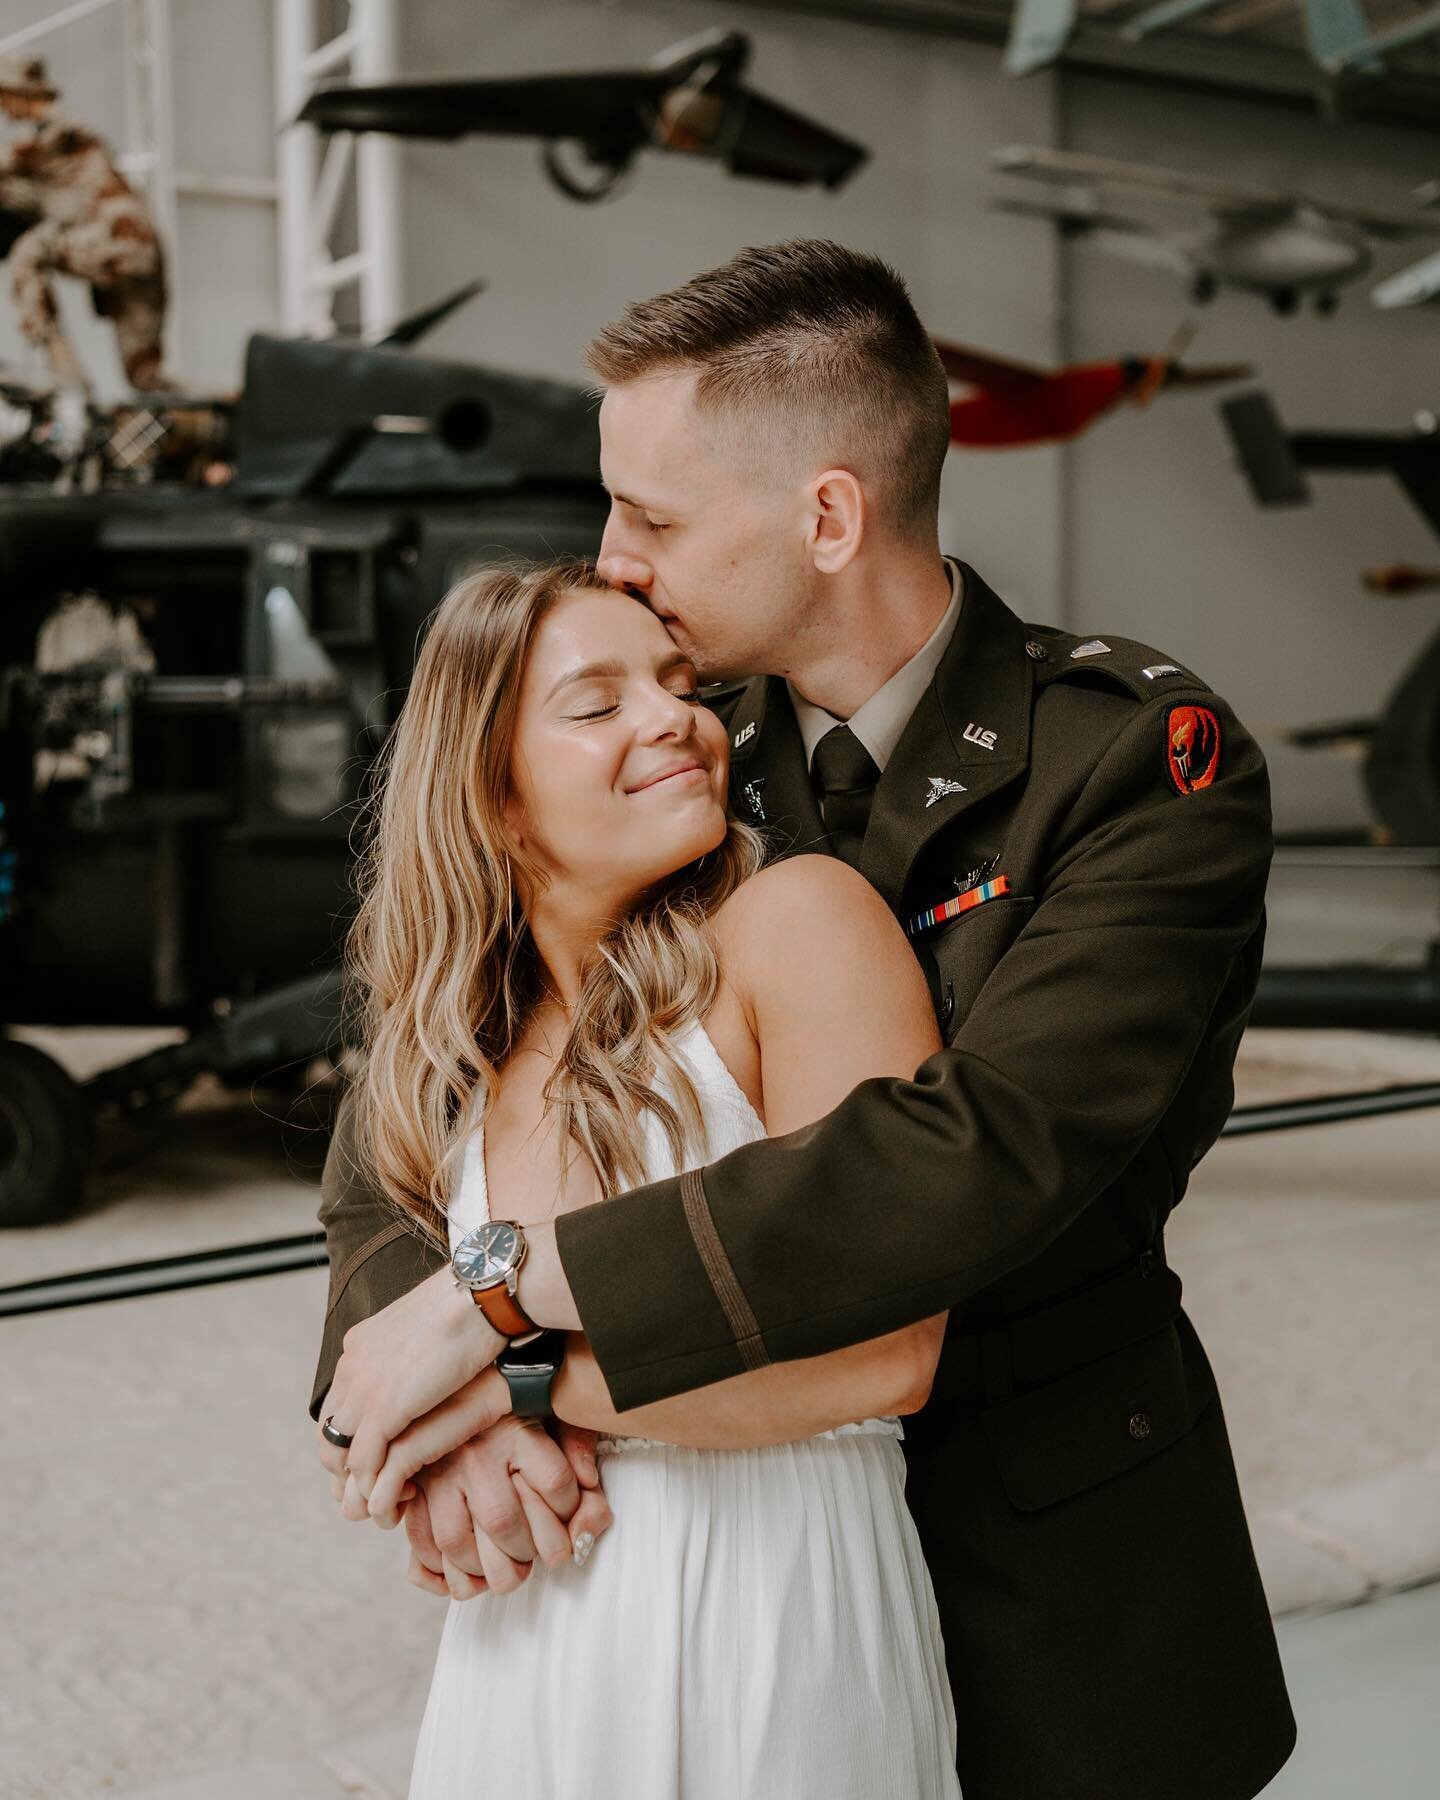 Max + Maggie + the Army Aviation Museum 🚁 

Congrats to one of the newest Blackhawk pilots! 

&mdash;

#fortnovoselphotographer #fortruckerphotographer #armyaviation #armymuseum #militaryphotographer #militaryhomecomingphotographer #militaryceremony